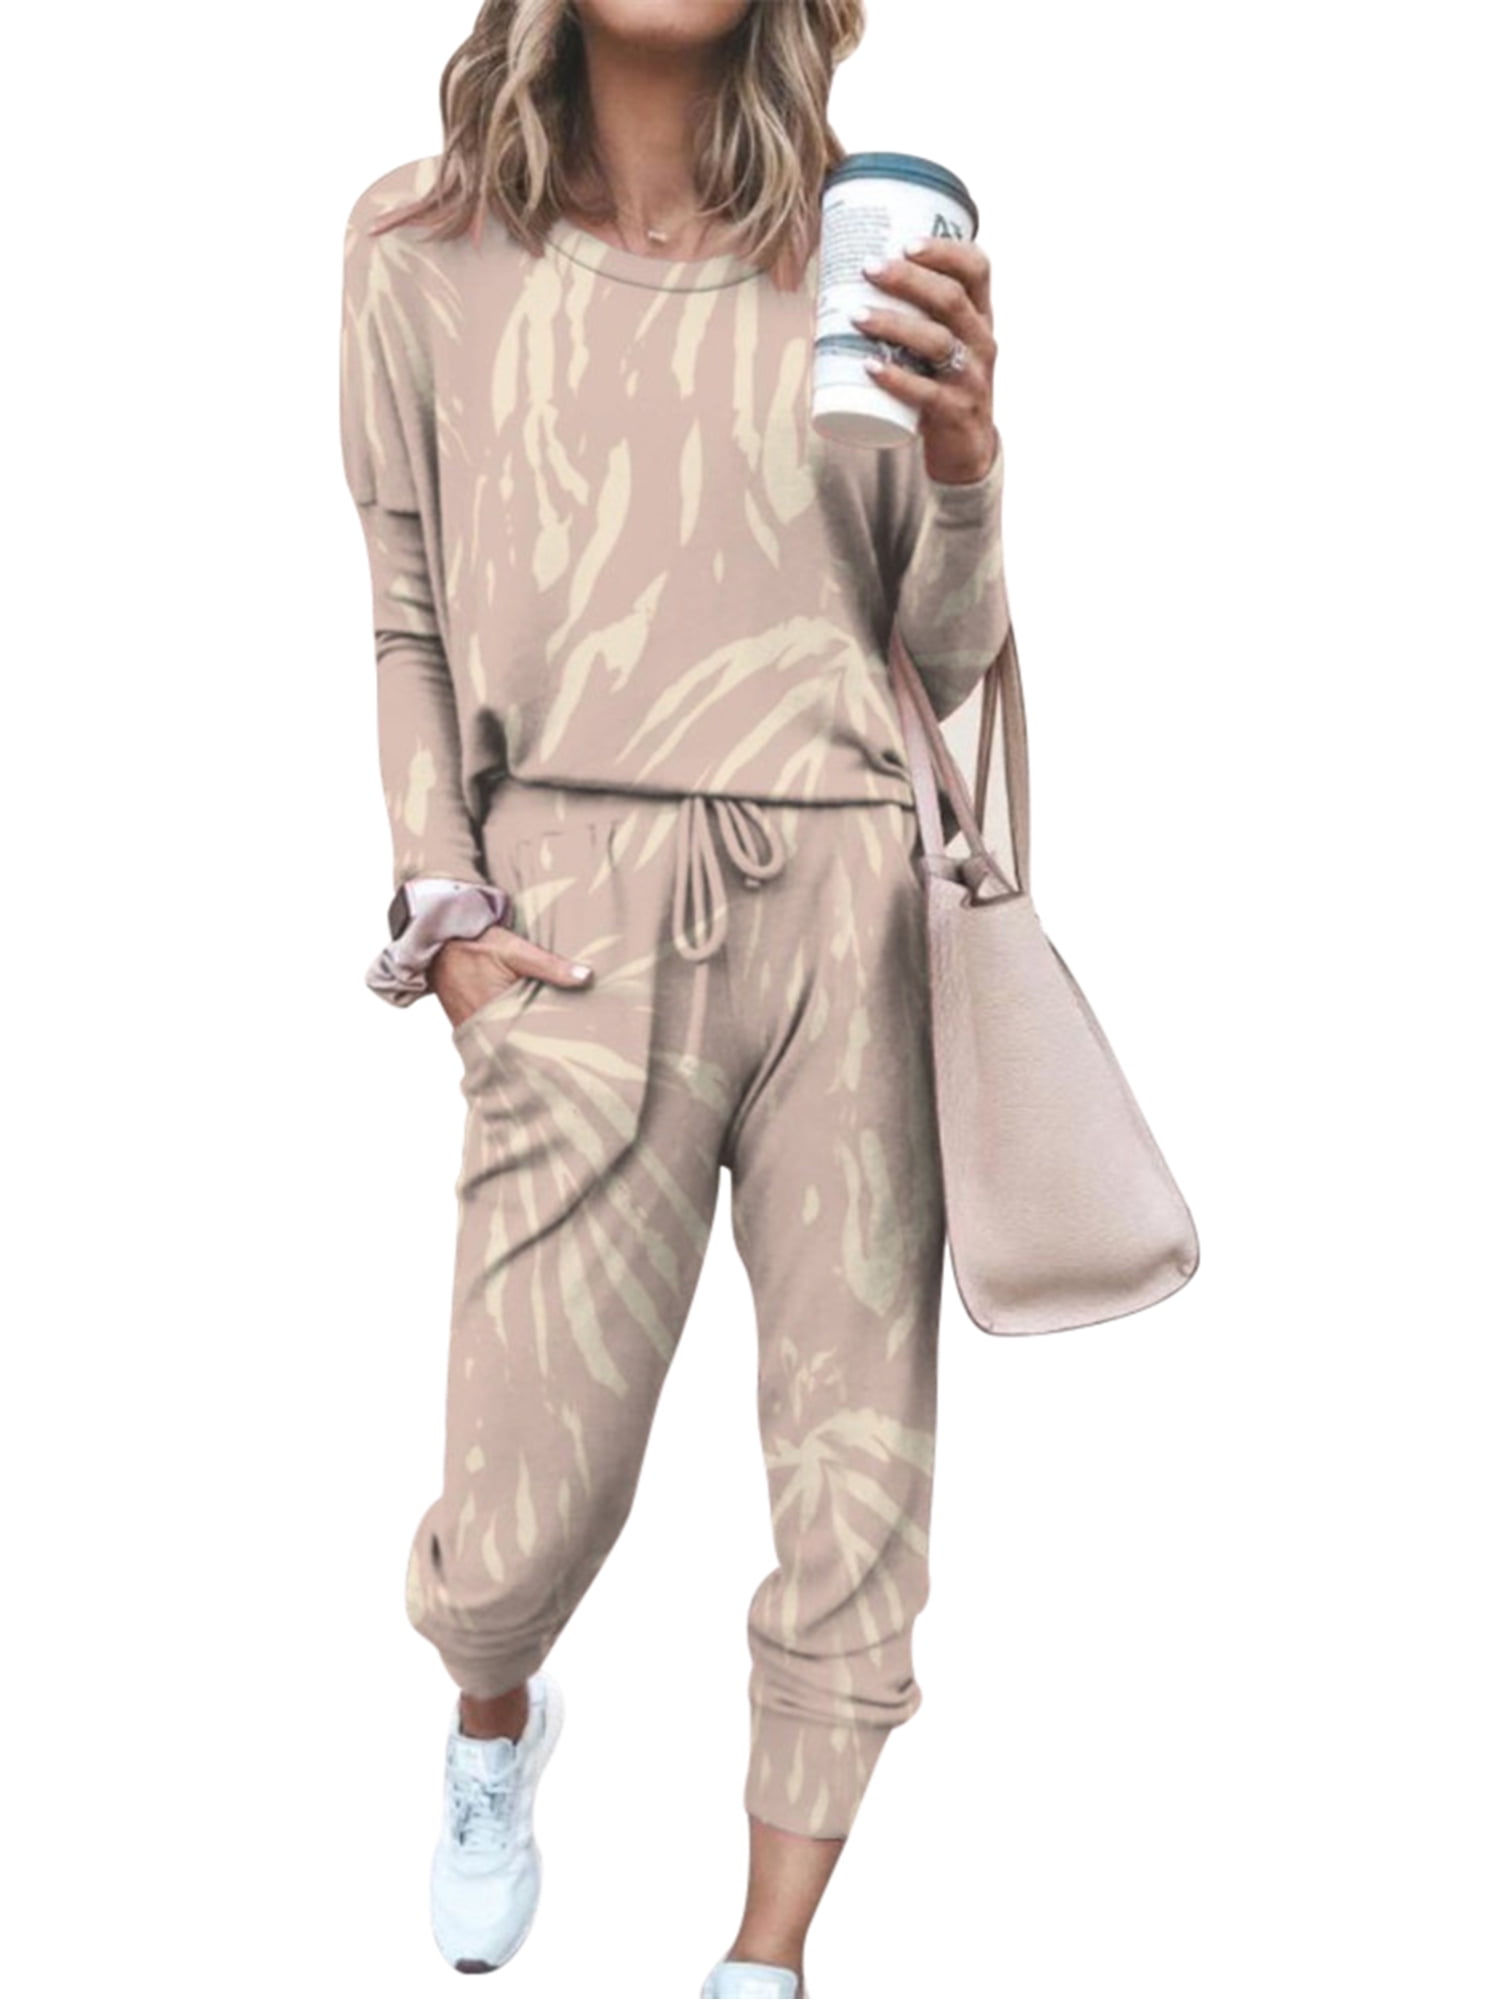 2 Piece Track Suit Set High Low Top and Bottoms Casual Loungewear Sweatshirt Jog 